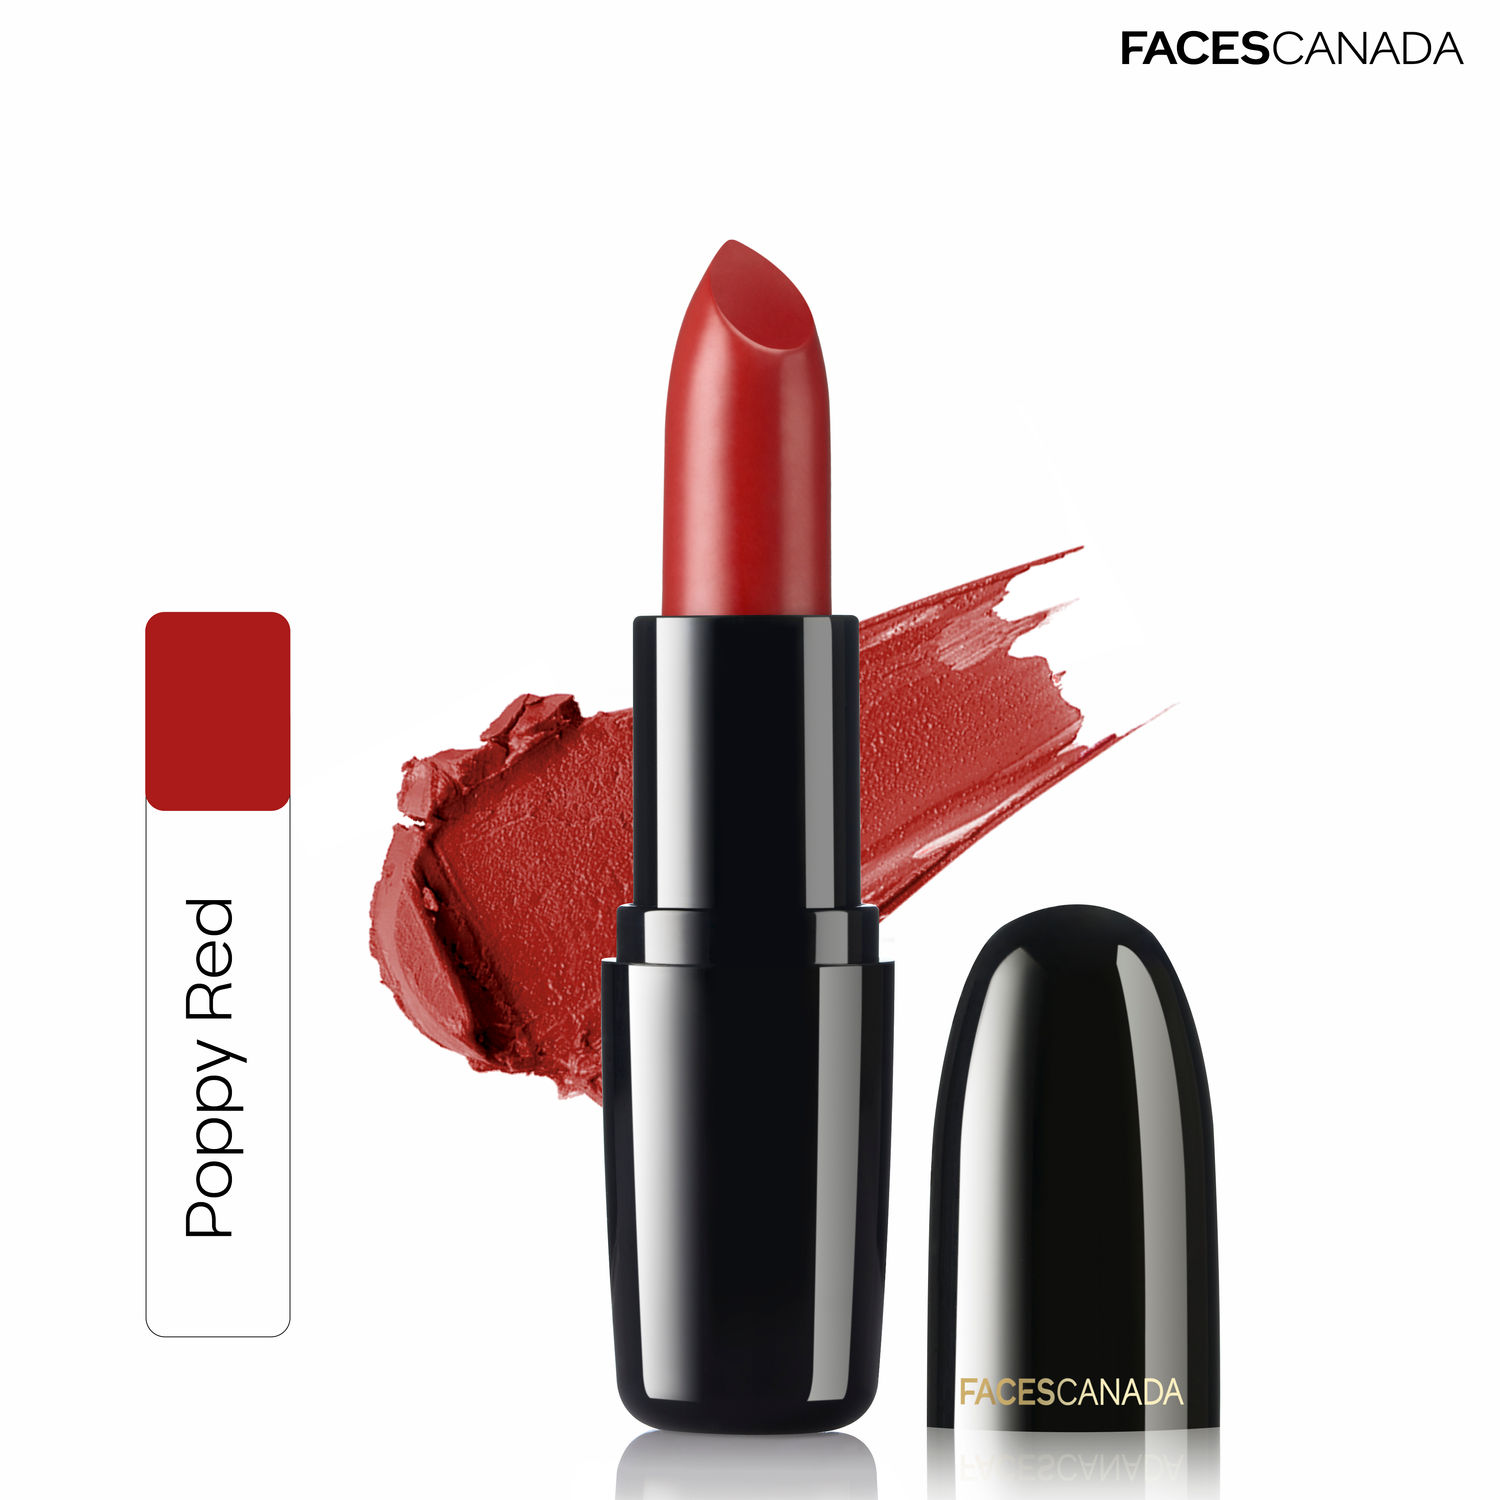 Buy FACES CANADA Weightless Creme Finish Lipstick - Poppy Red 01, 4g | Creamy Finish | Silky Smooth Texture | Long Lasting Rich Color | Hydrated Lips | Vitamin E, Jojoba Oil, Shea Butter, Almond Oil - Purplle